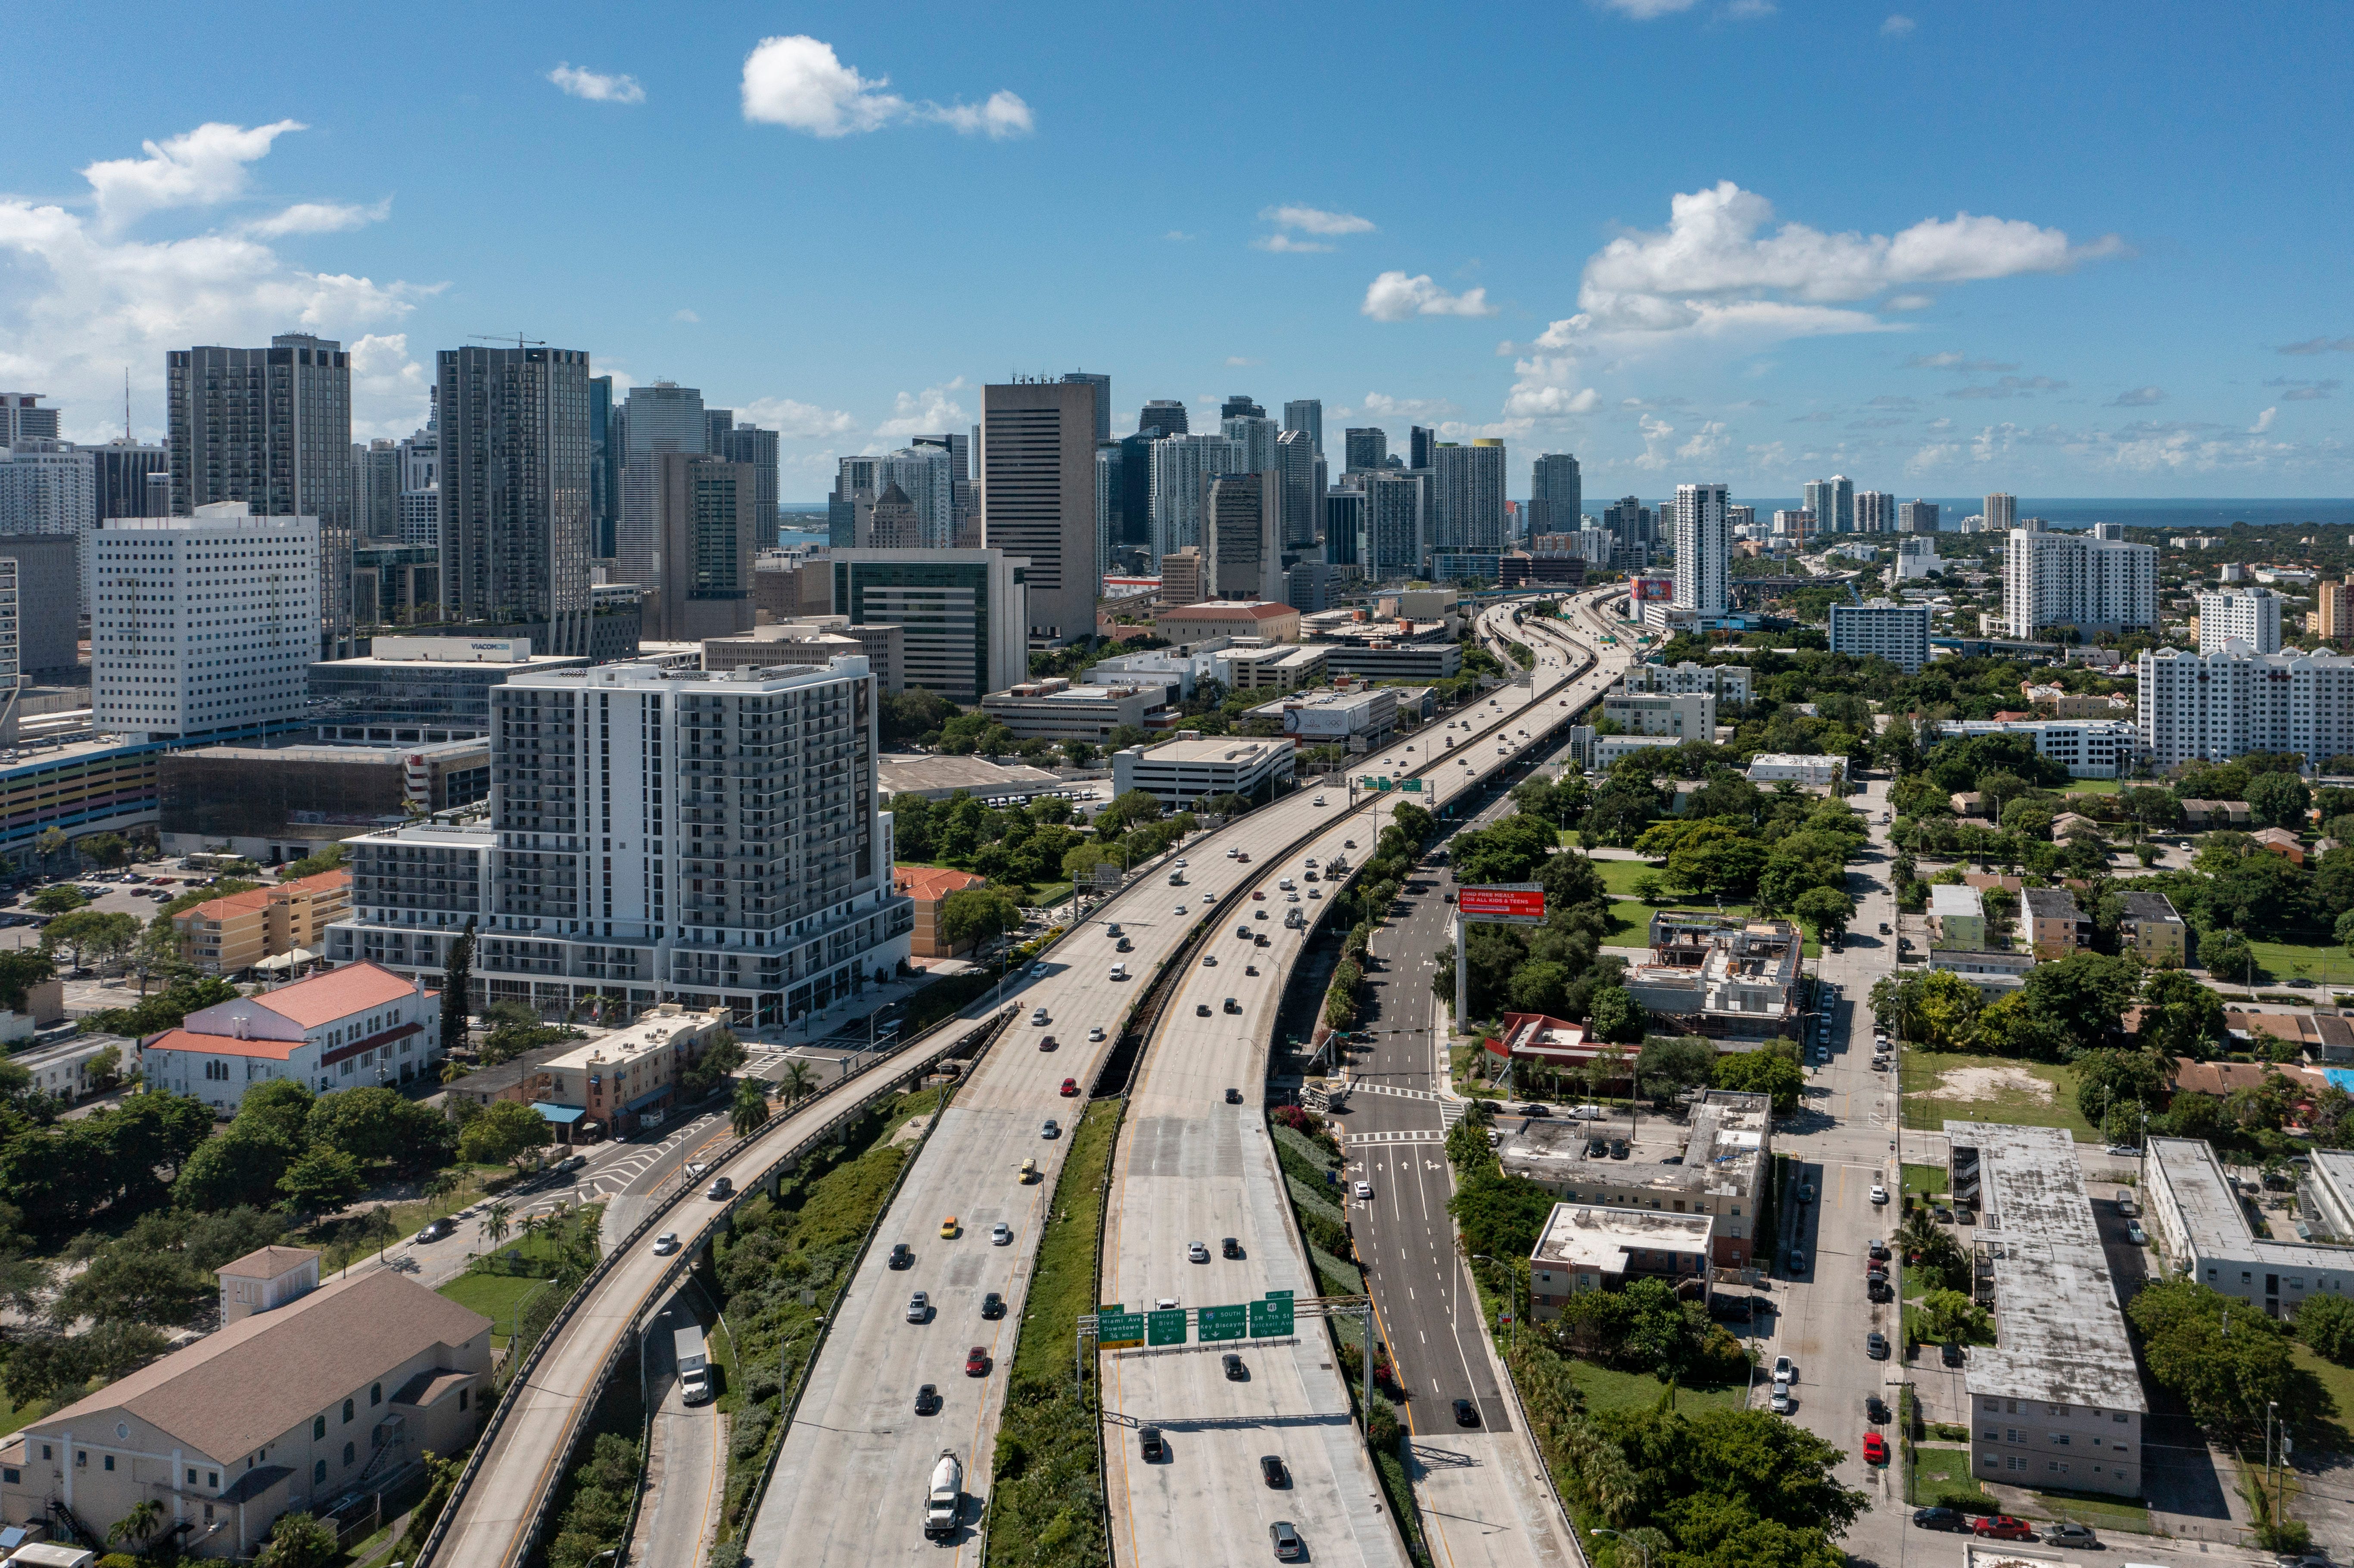 Interstate 95 runs through Miami’s Overtown neighborhood, which is shown in this recent photo to the right and bottom left of the highway. The historically Black Overtown neighborhood was decimated in the late 1950s and 1960s by construction of I-95, the Dolphin Expressway and the Midtown Interchange.